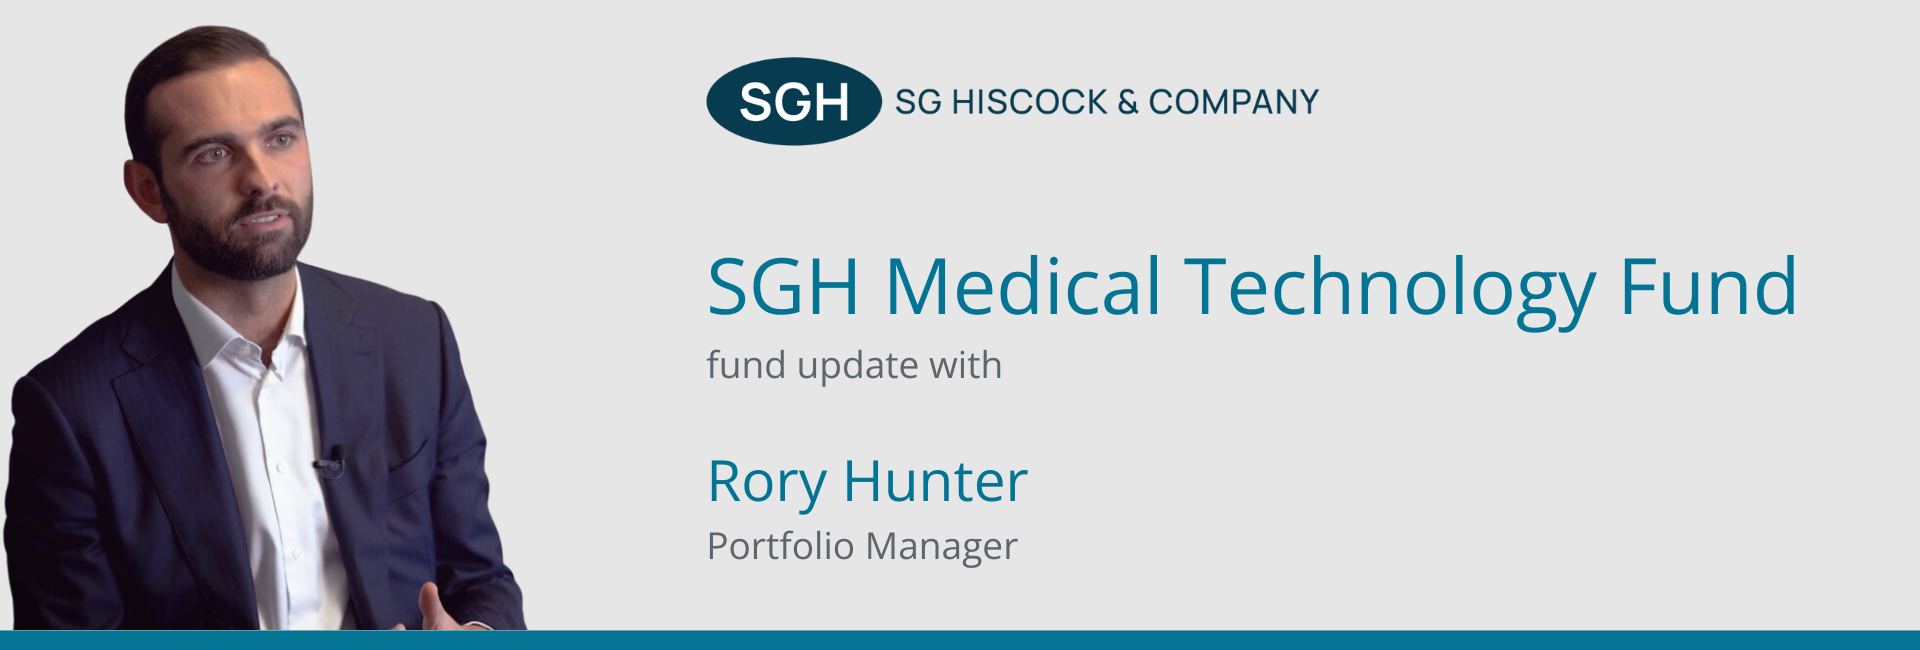 Rory Hunter - SGH Medical Technology Fund